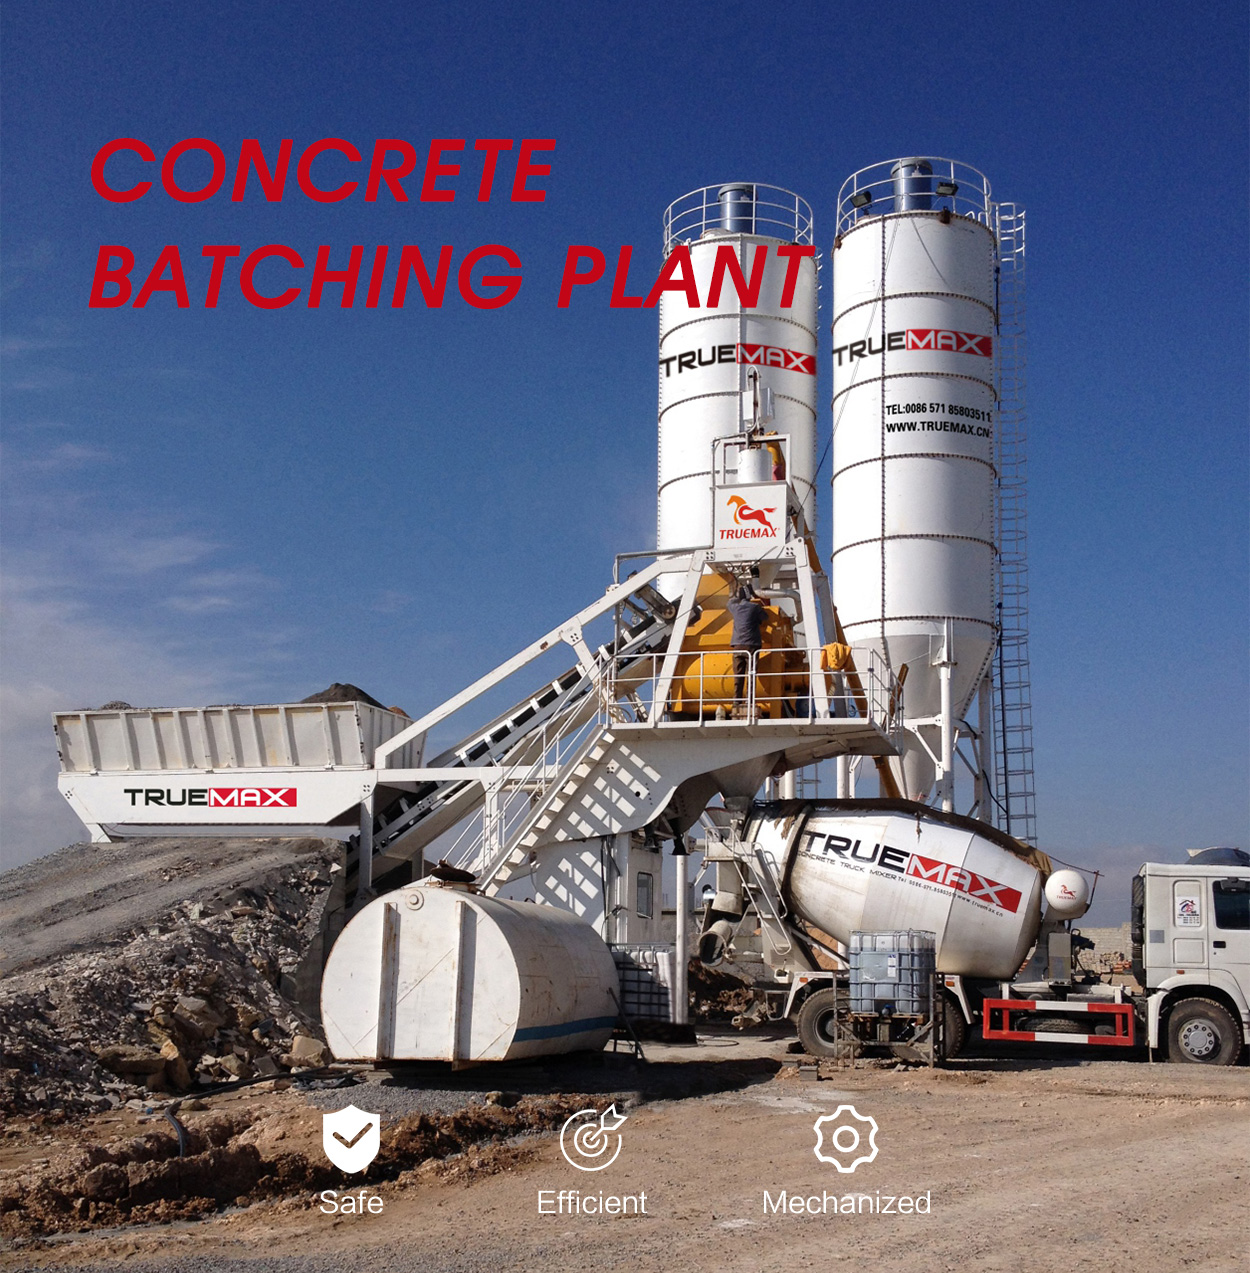 What are the advantages of small concrete batching plants